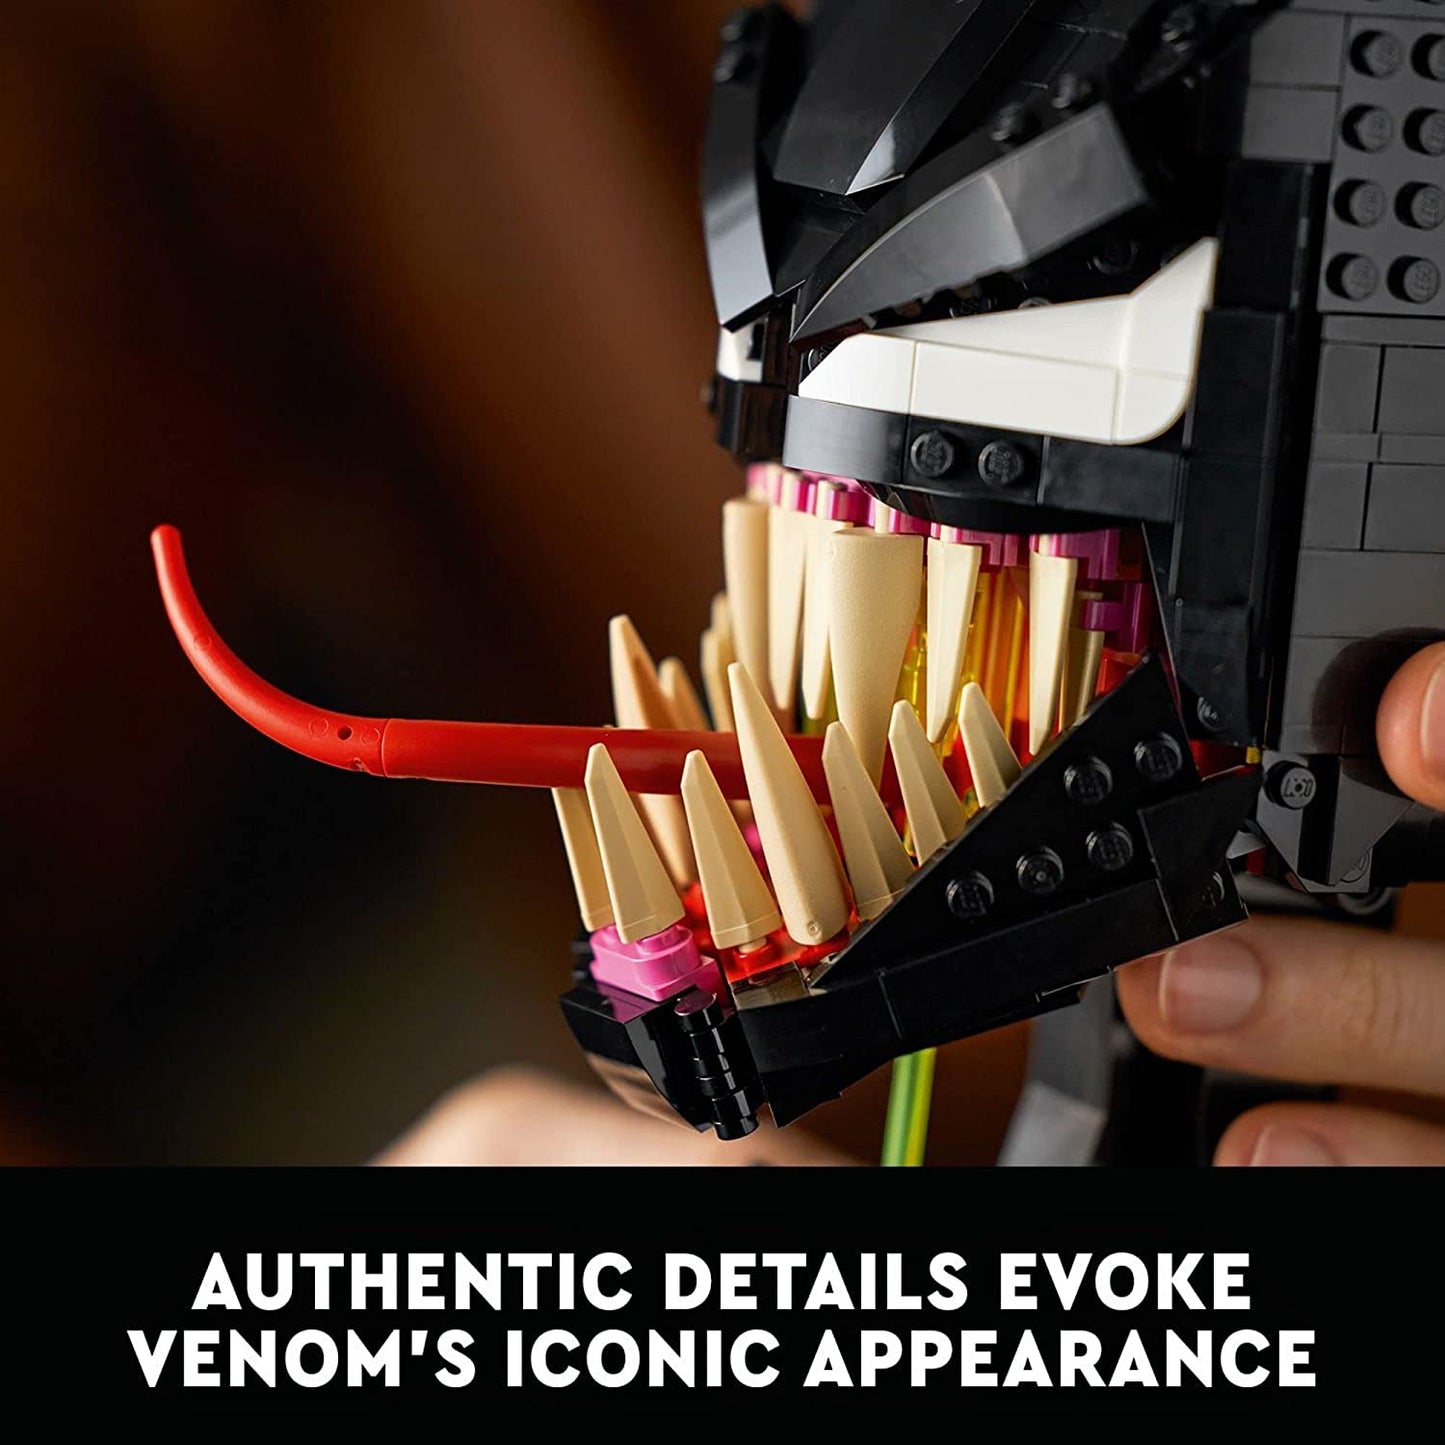 A close-up view of the face of a fully complete Venom Lego building set. The text reads, "Authentic details evoke Venom's iconic appearance."